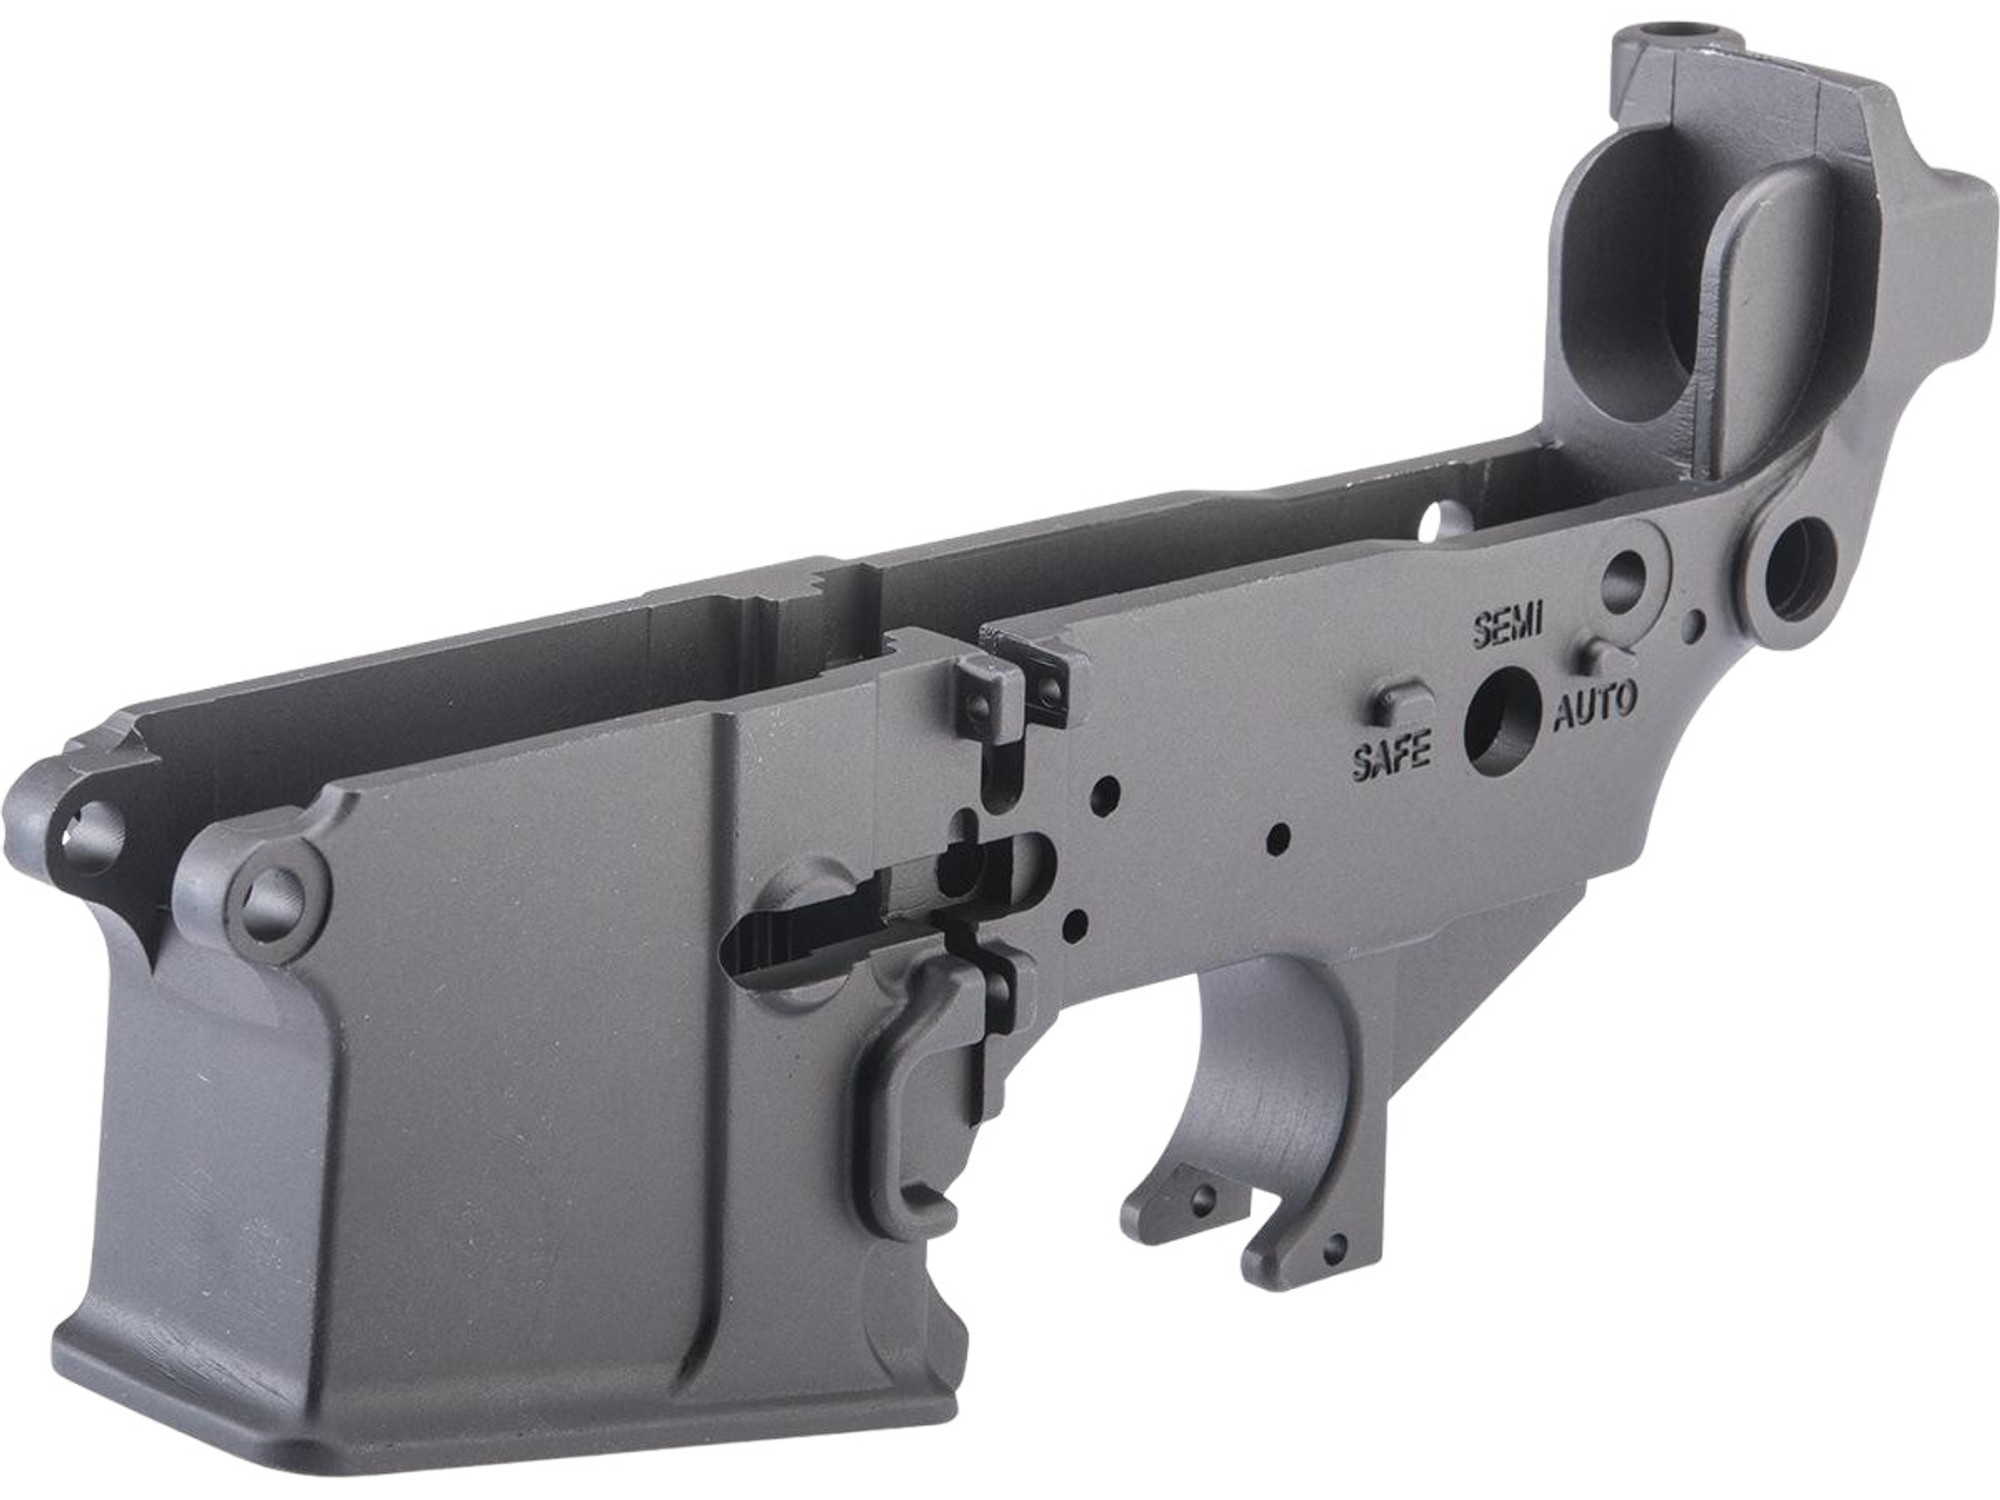 WE-Tech Replacement Lower Receiver for EMG Knight's Armament PDW Gas Blowback Airsoft Rifles